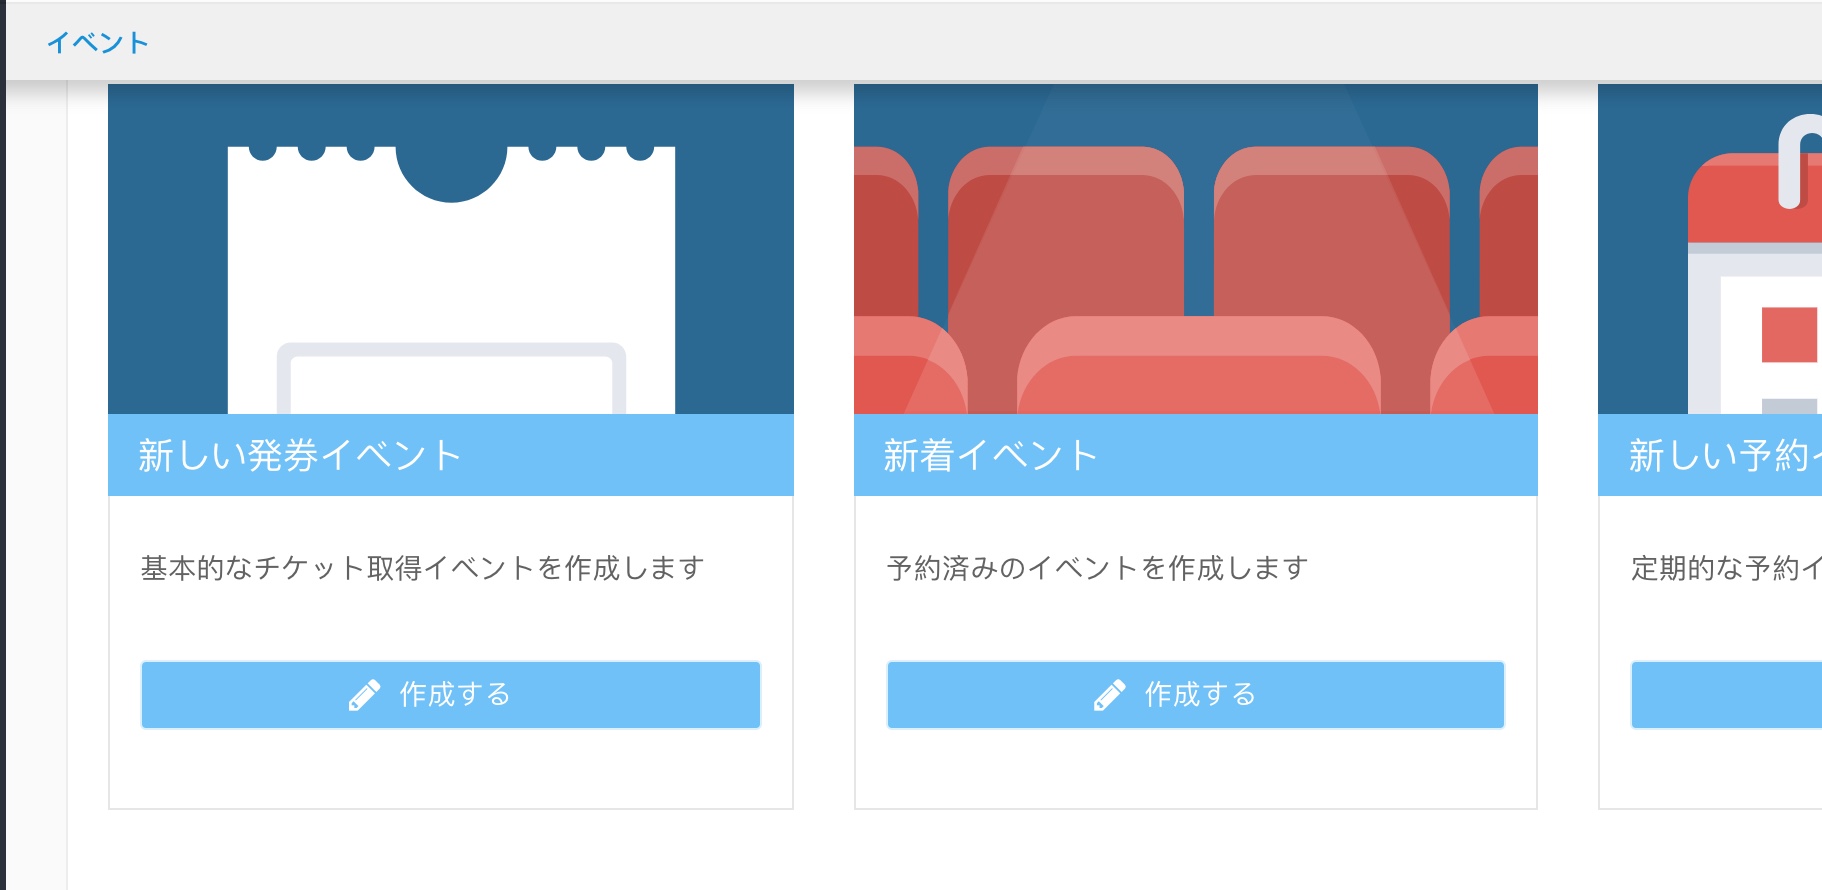 An example showing Multi-Language Support in SaaS Platforms